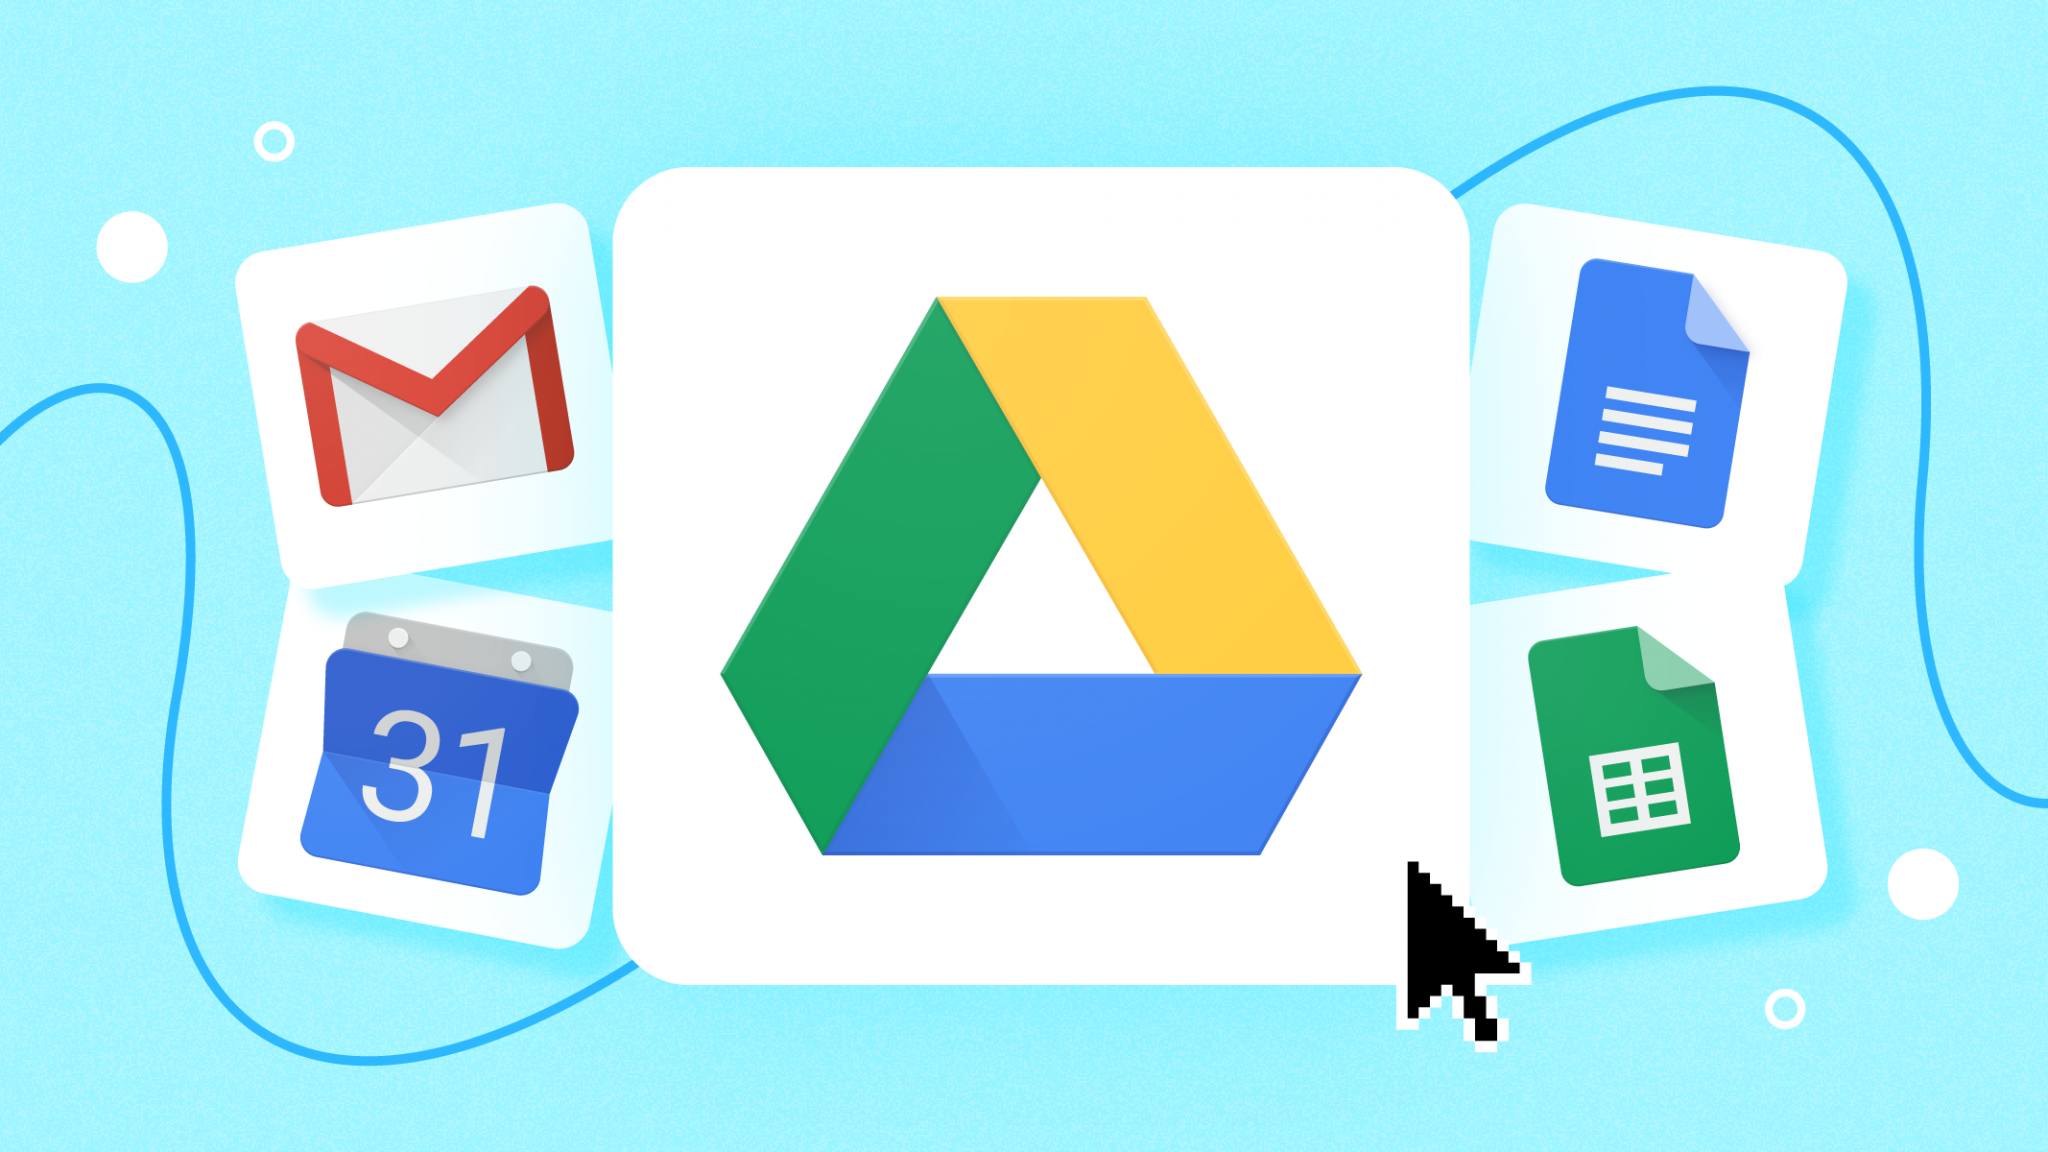 Google Drive 80.0.1 for ios download free